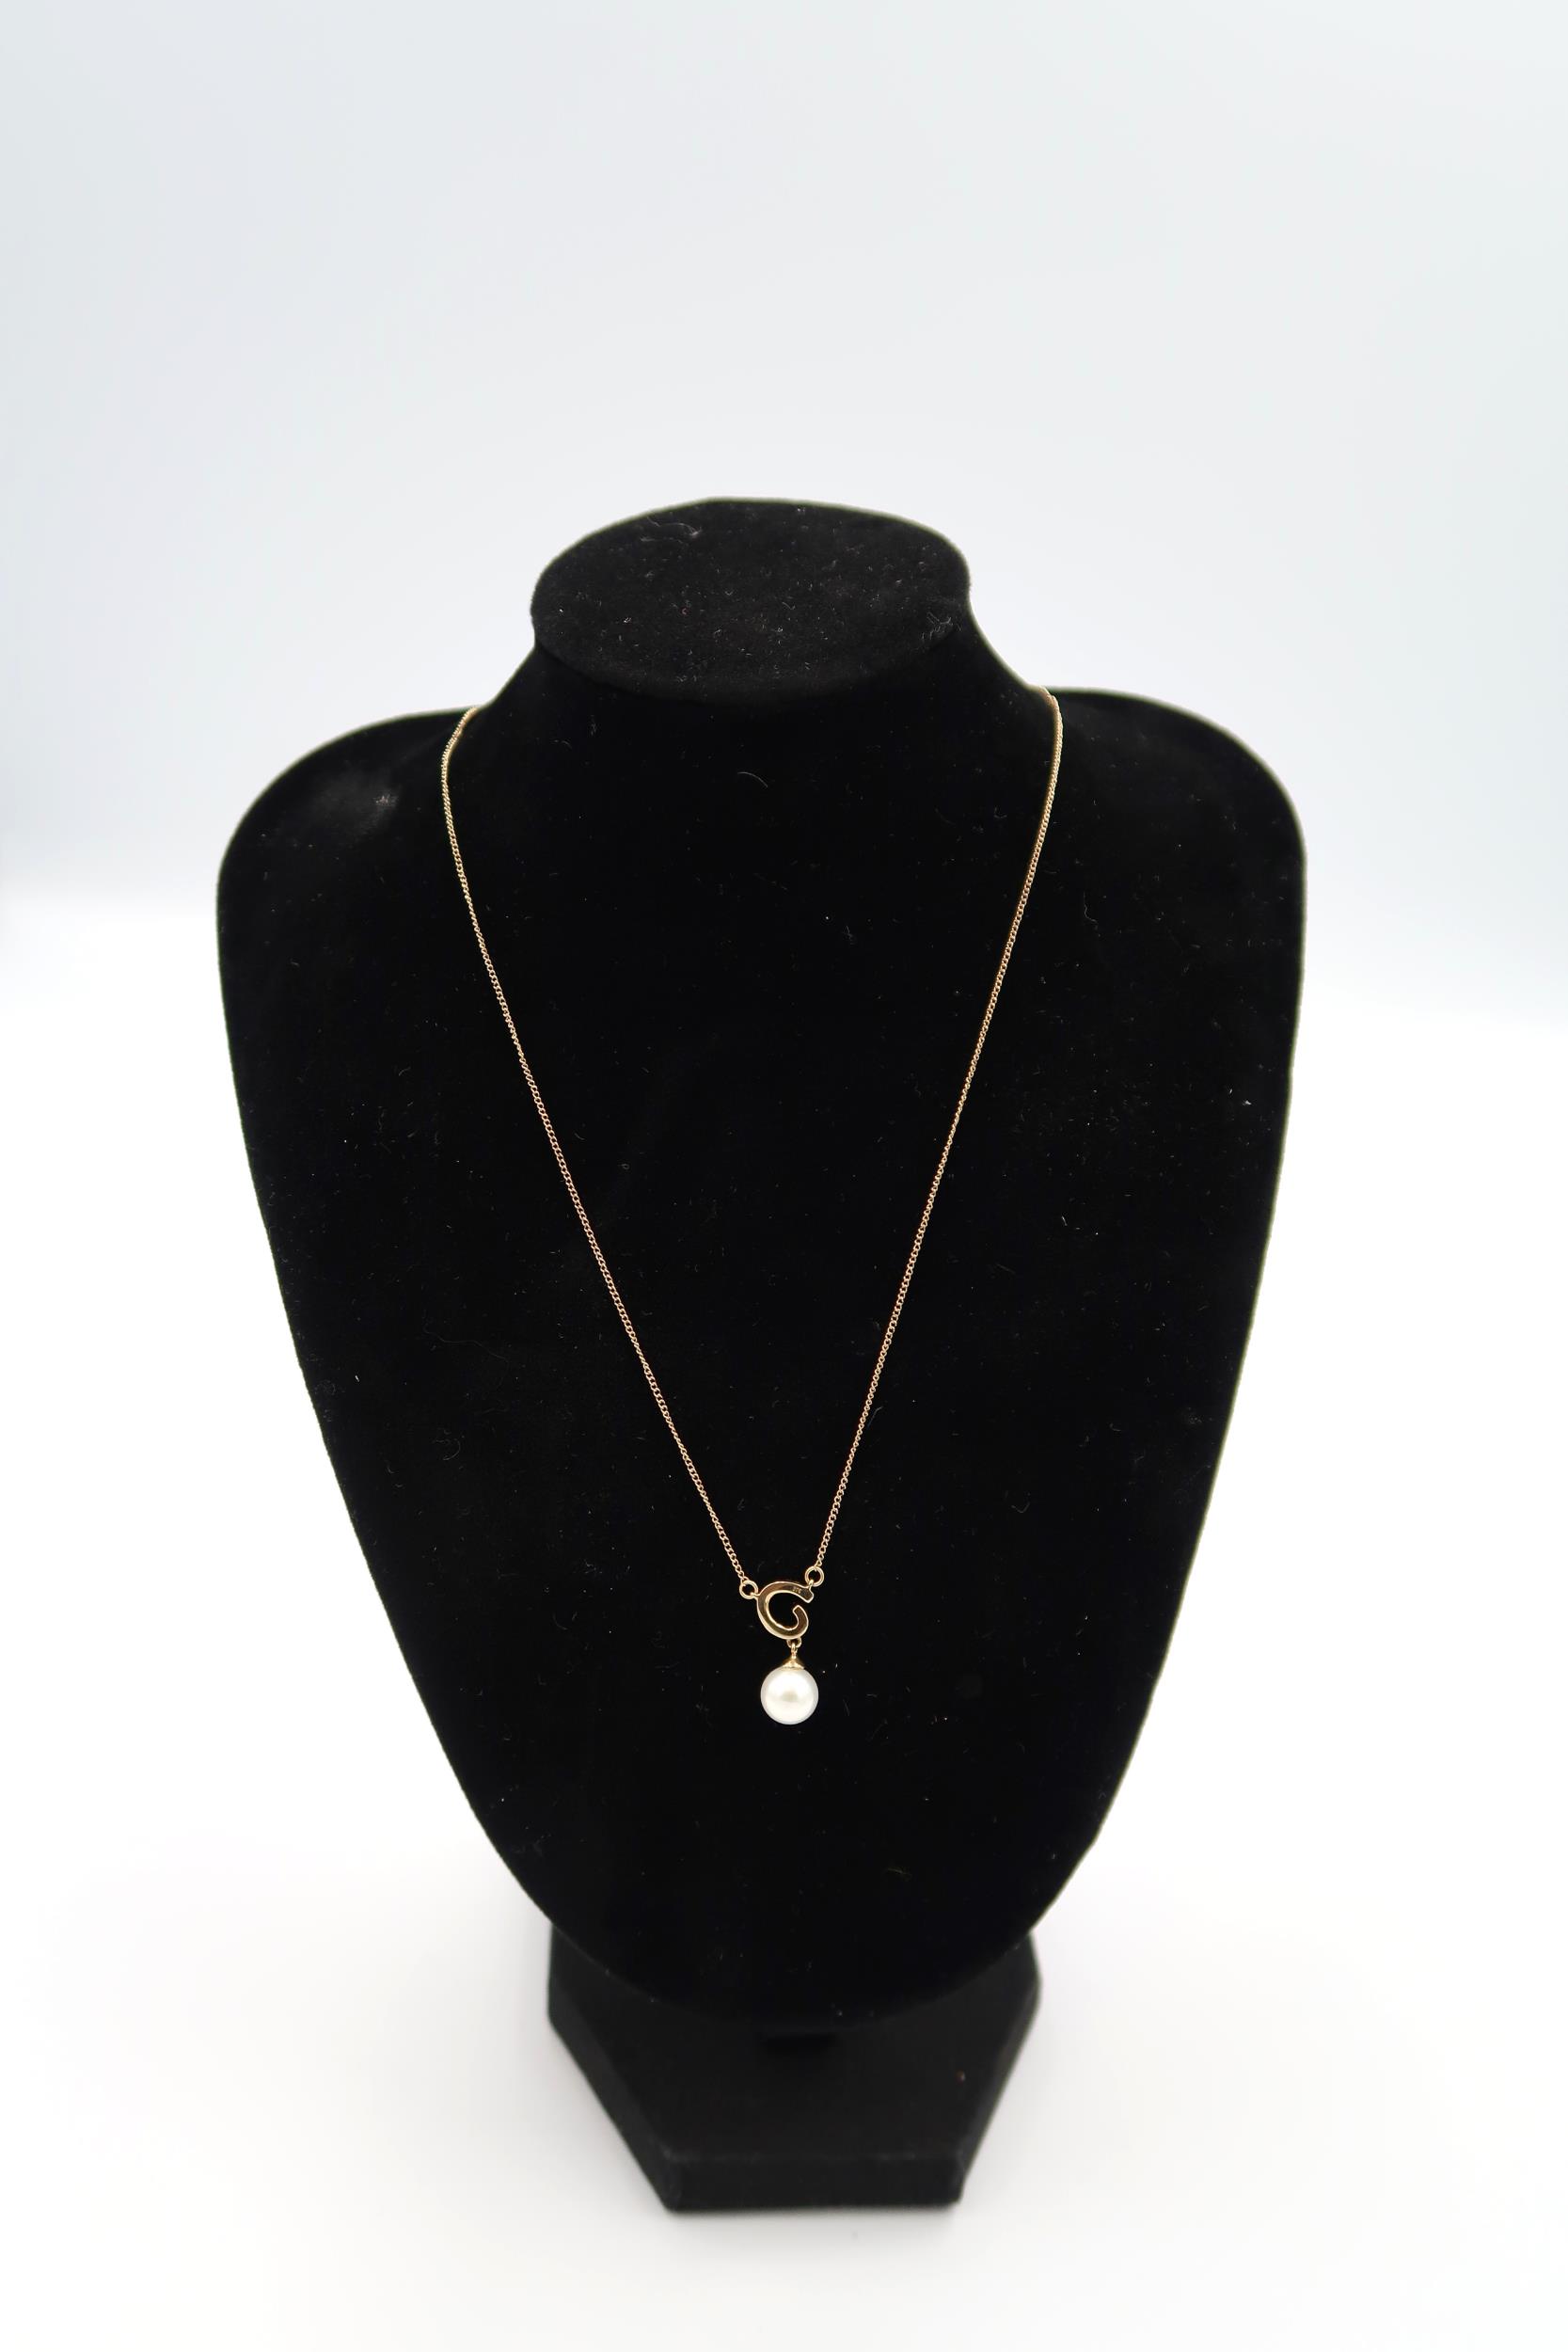 A 9ct yellow gold pearl and diamond pendant on 22 inch chain - ex jewellers stock, as new